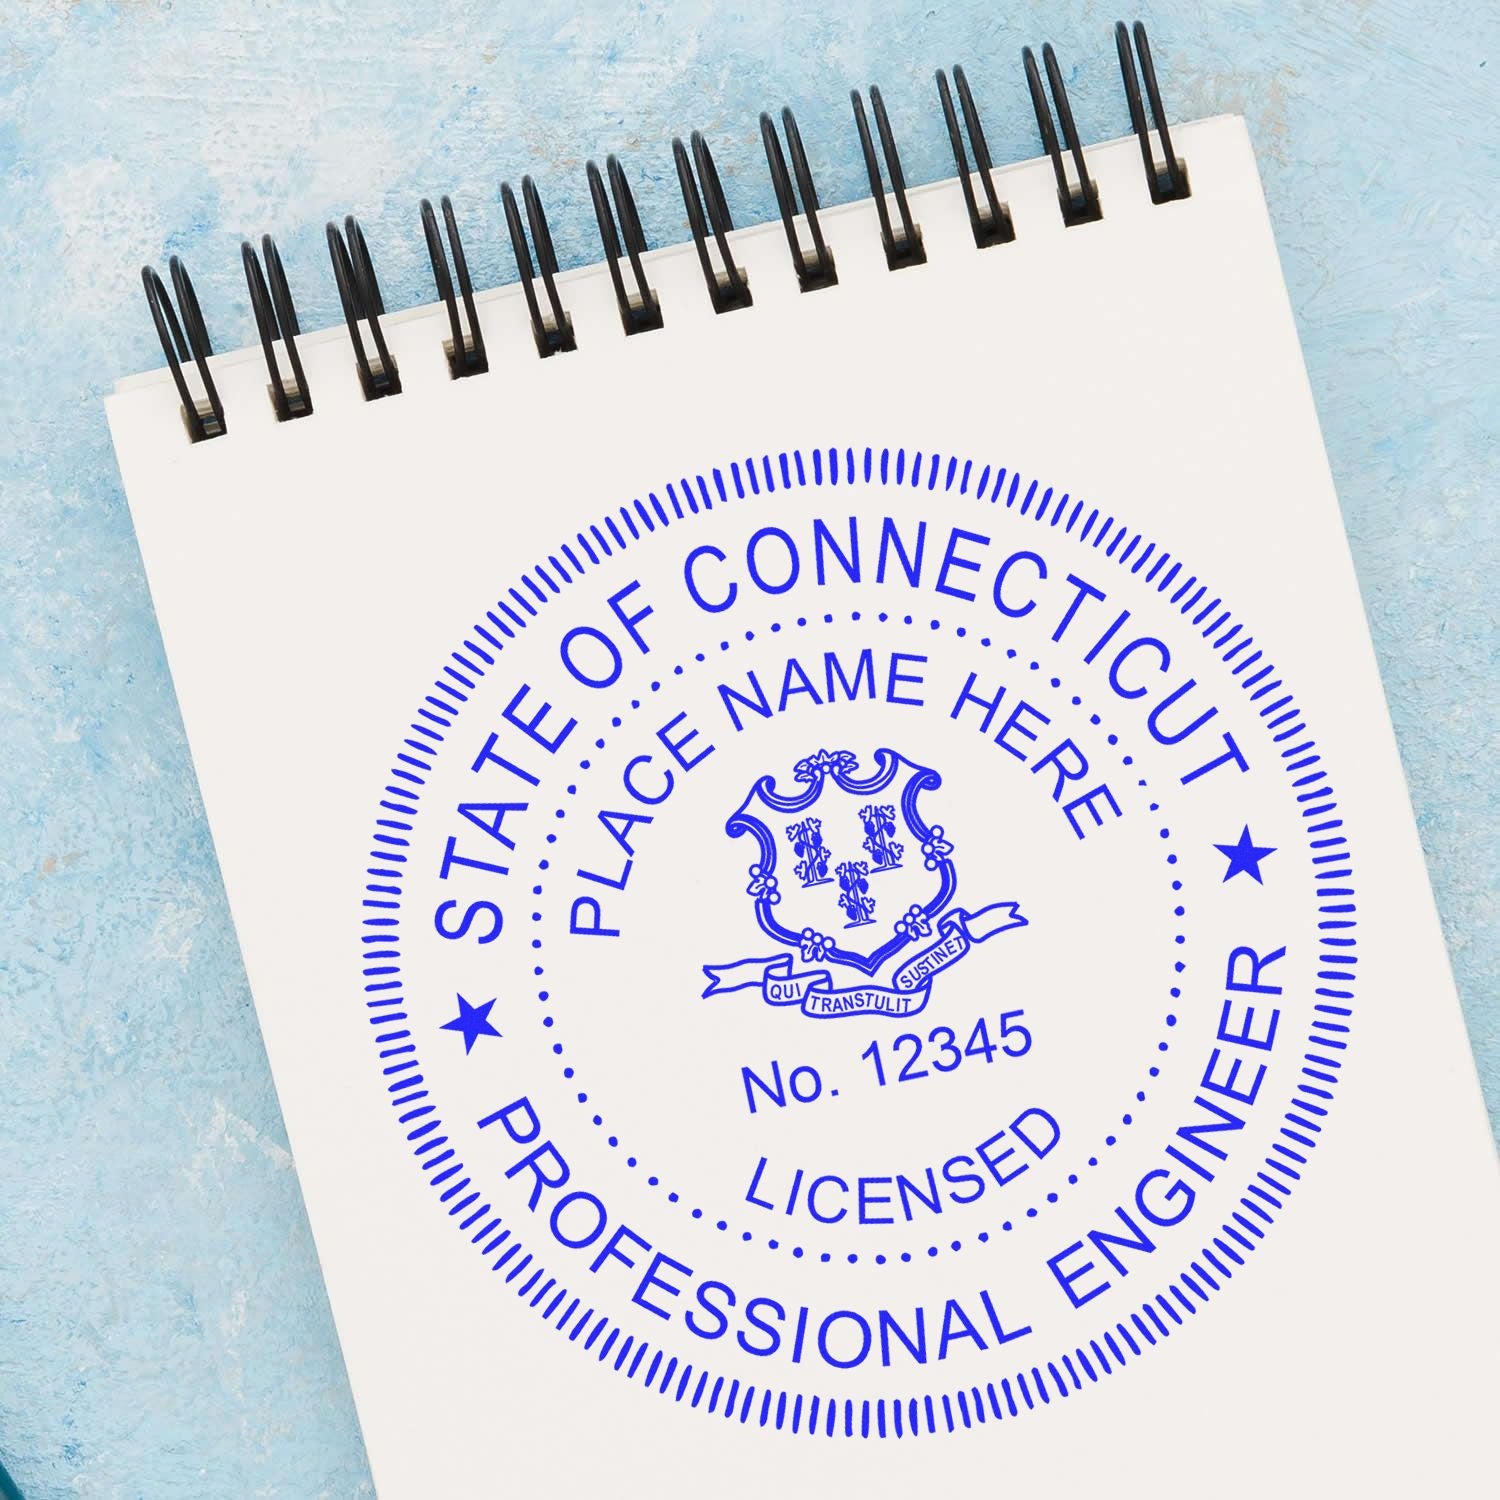 In Pursuit of Excellence: Meeting the Connecticut PE Stamp Requirements Feature Image